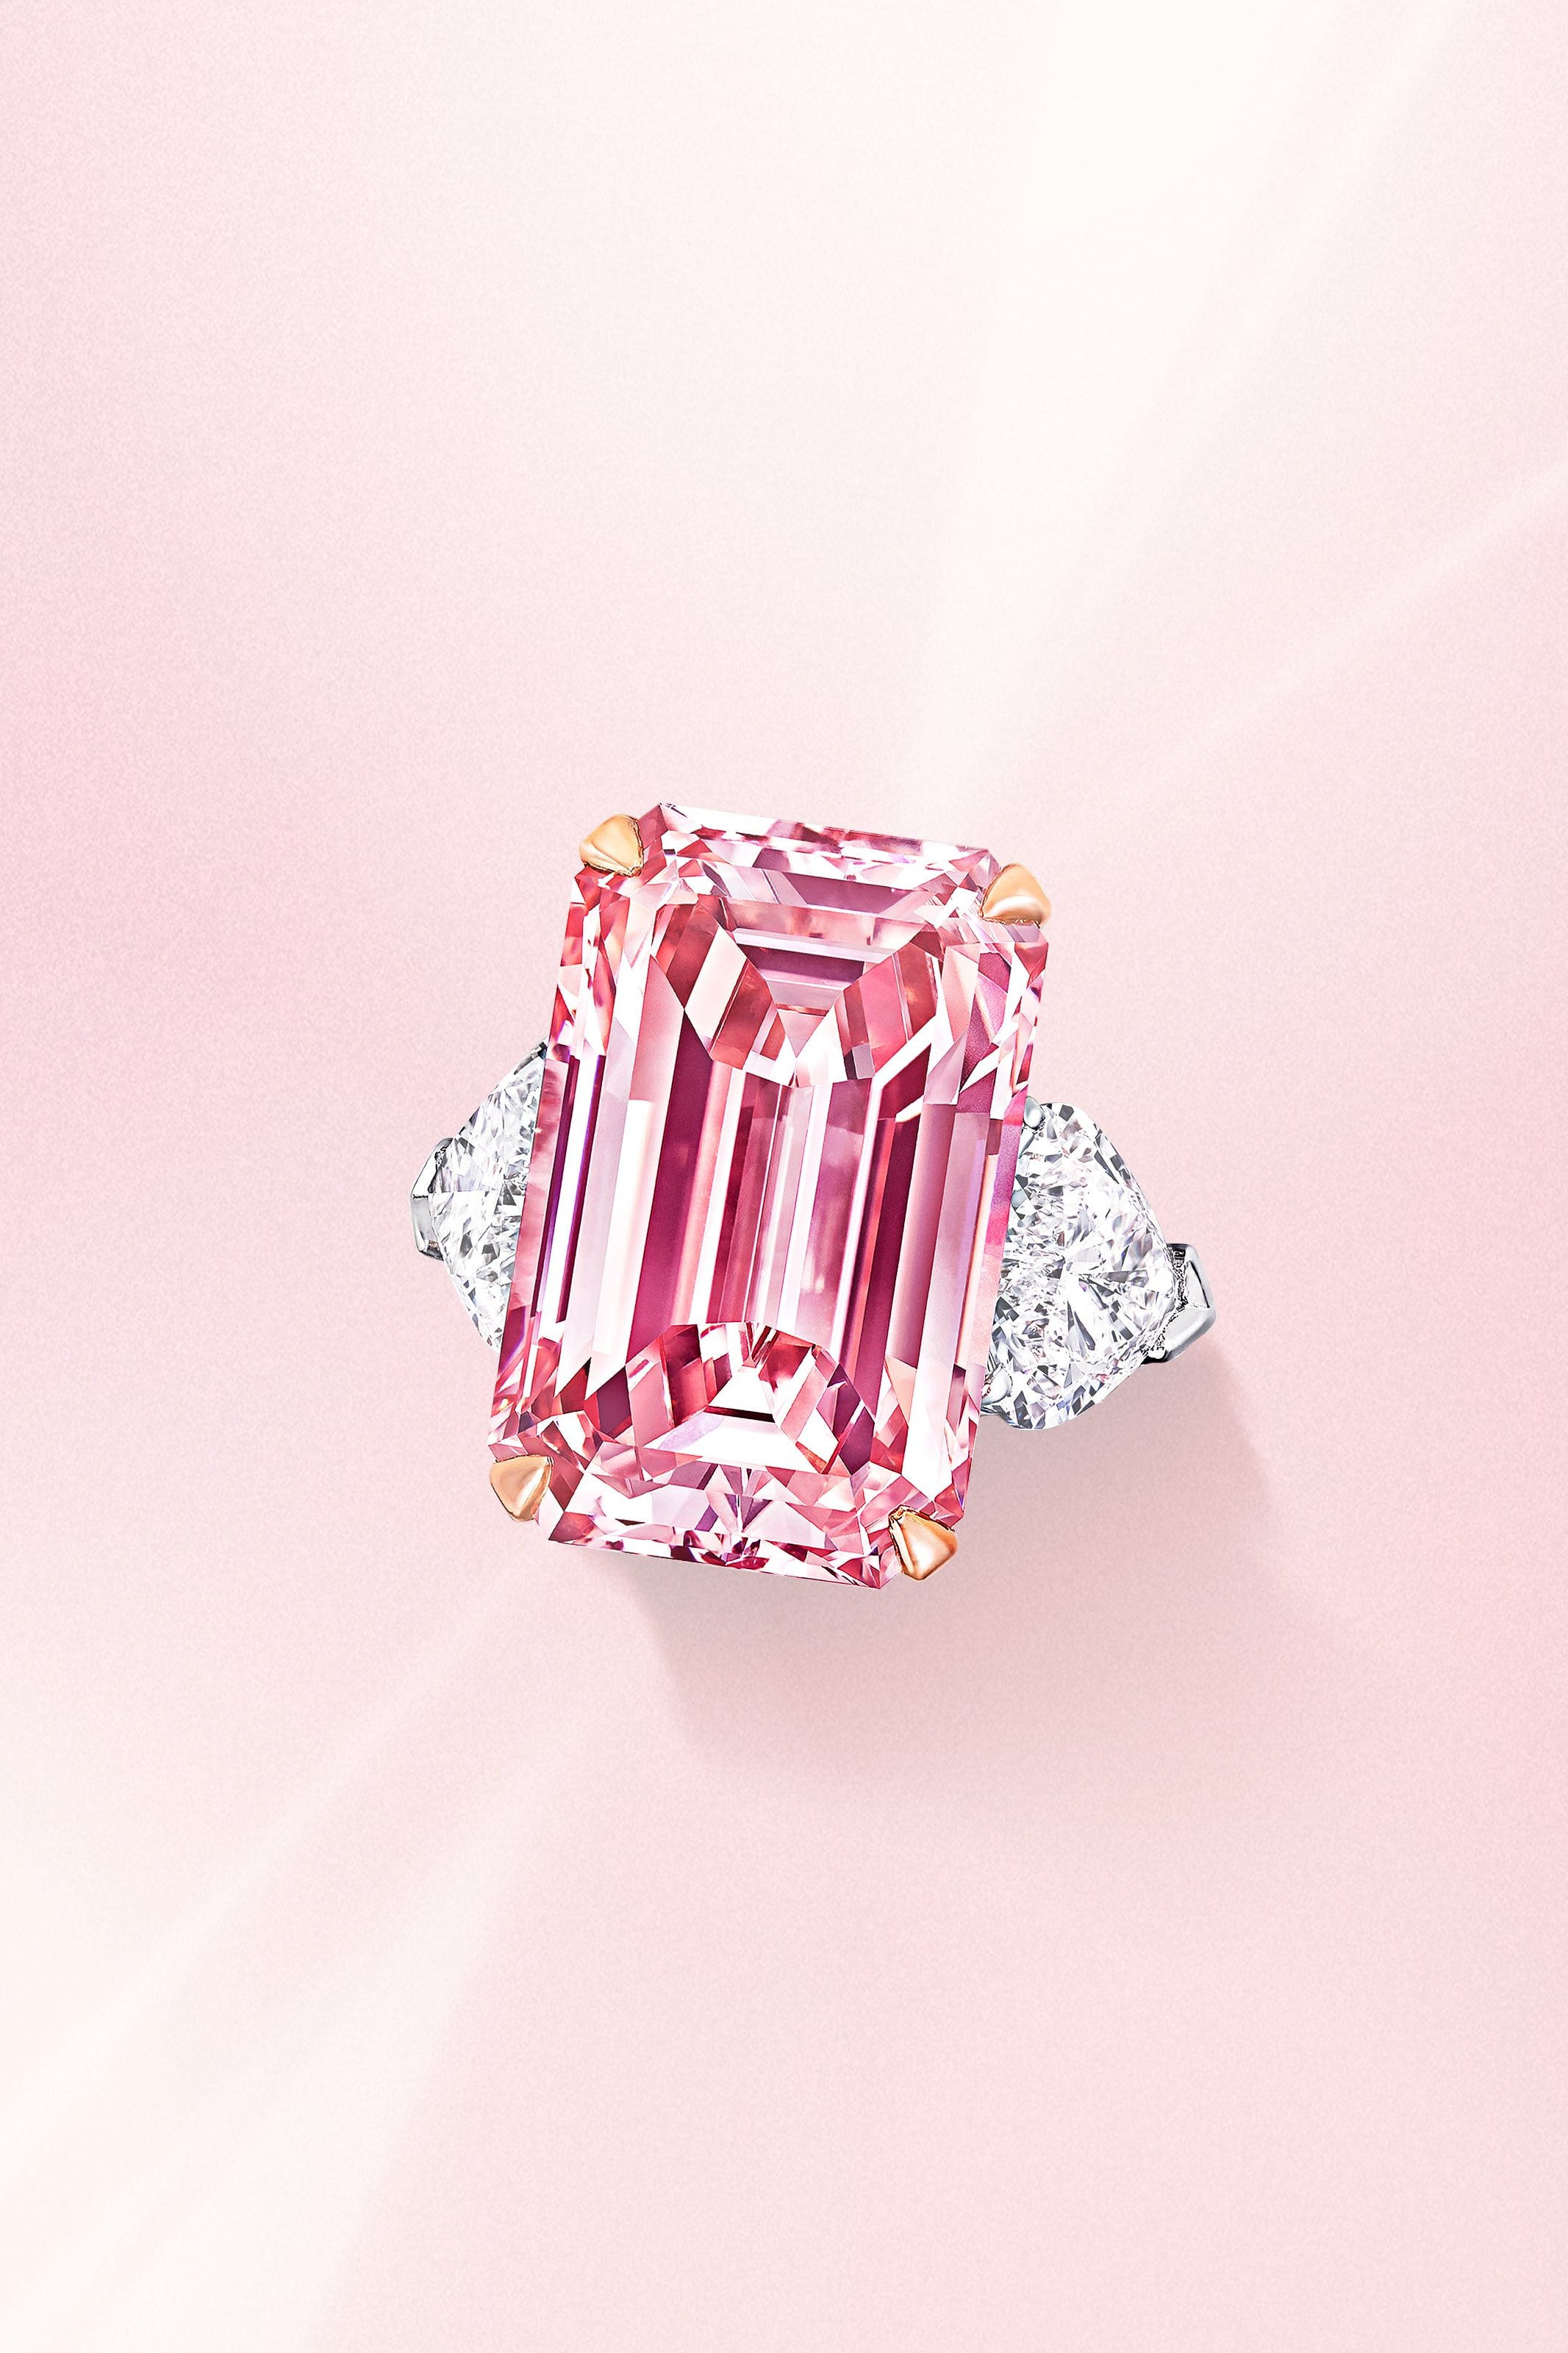 Rectangular emerald cut pink diamond ring with side white diamonds on a platinum band from Graff